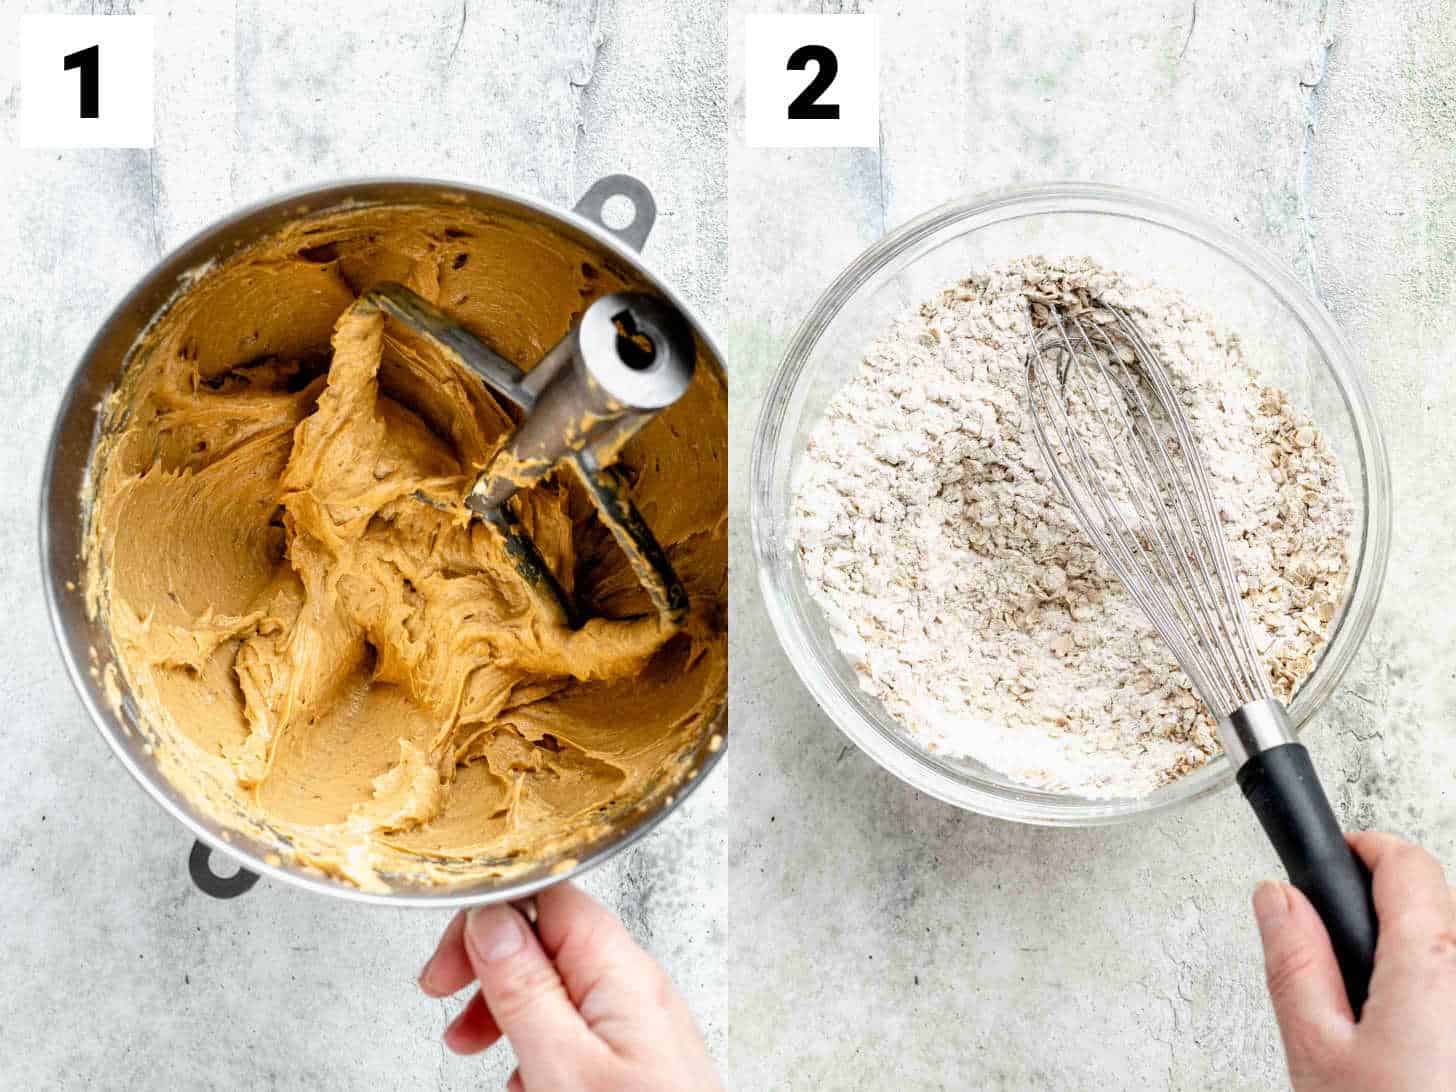 the peanut butter mixture and the dry mix